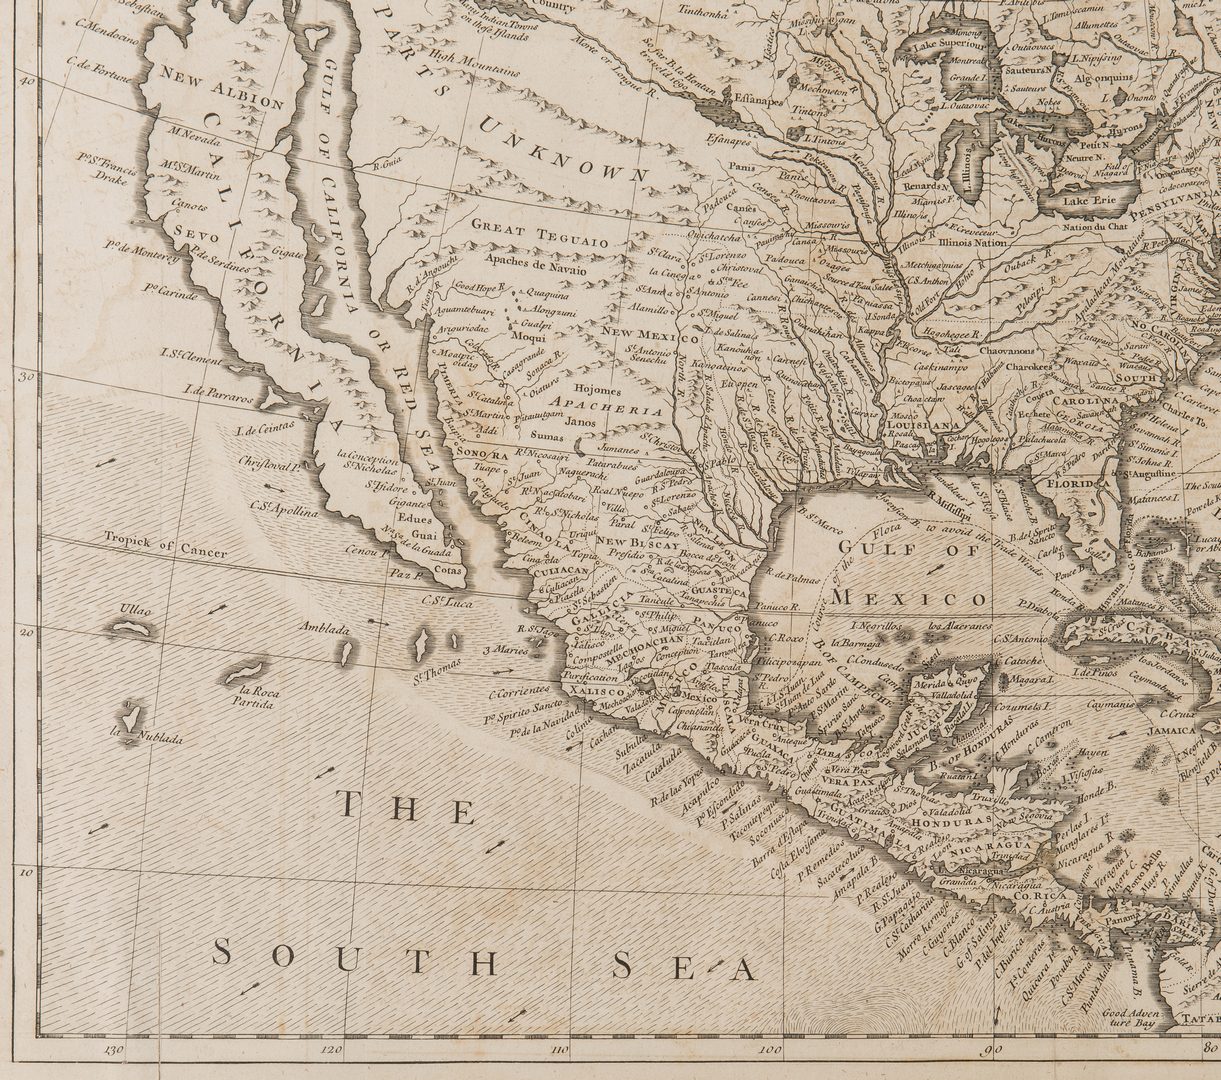 Lot 243: R.W. Seale, Map of North America, 1745